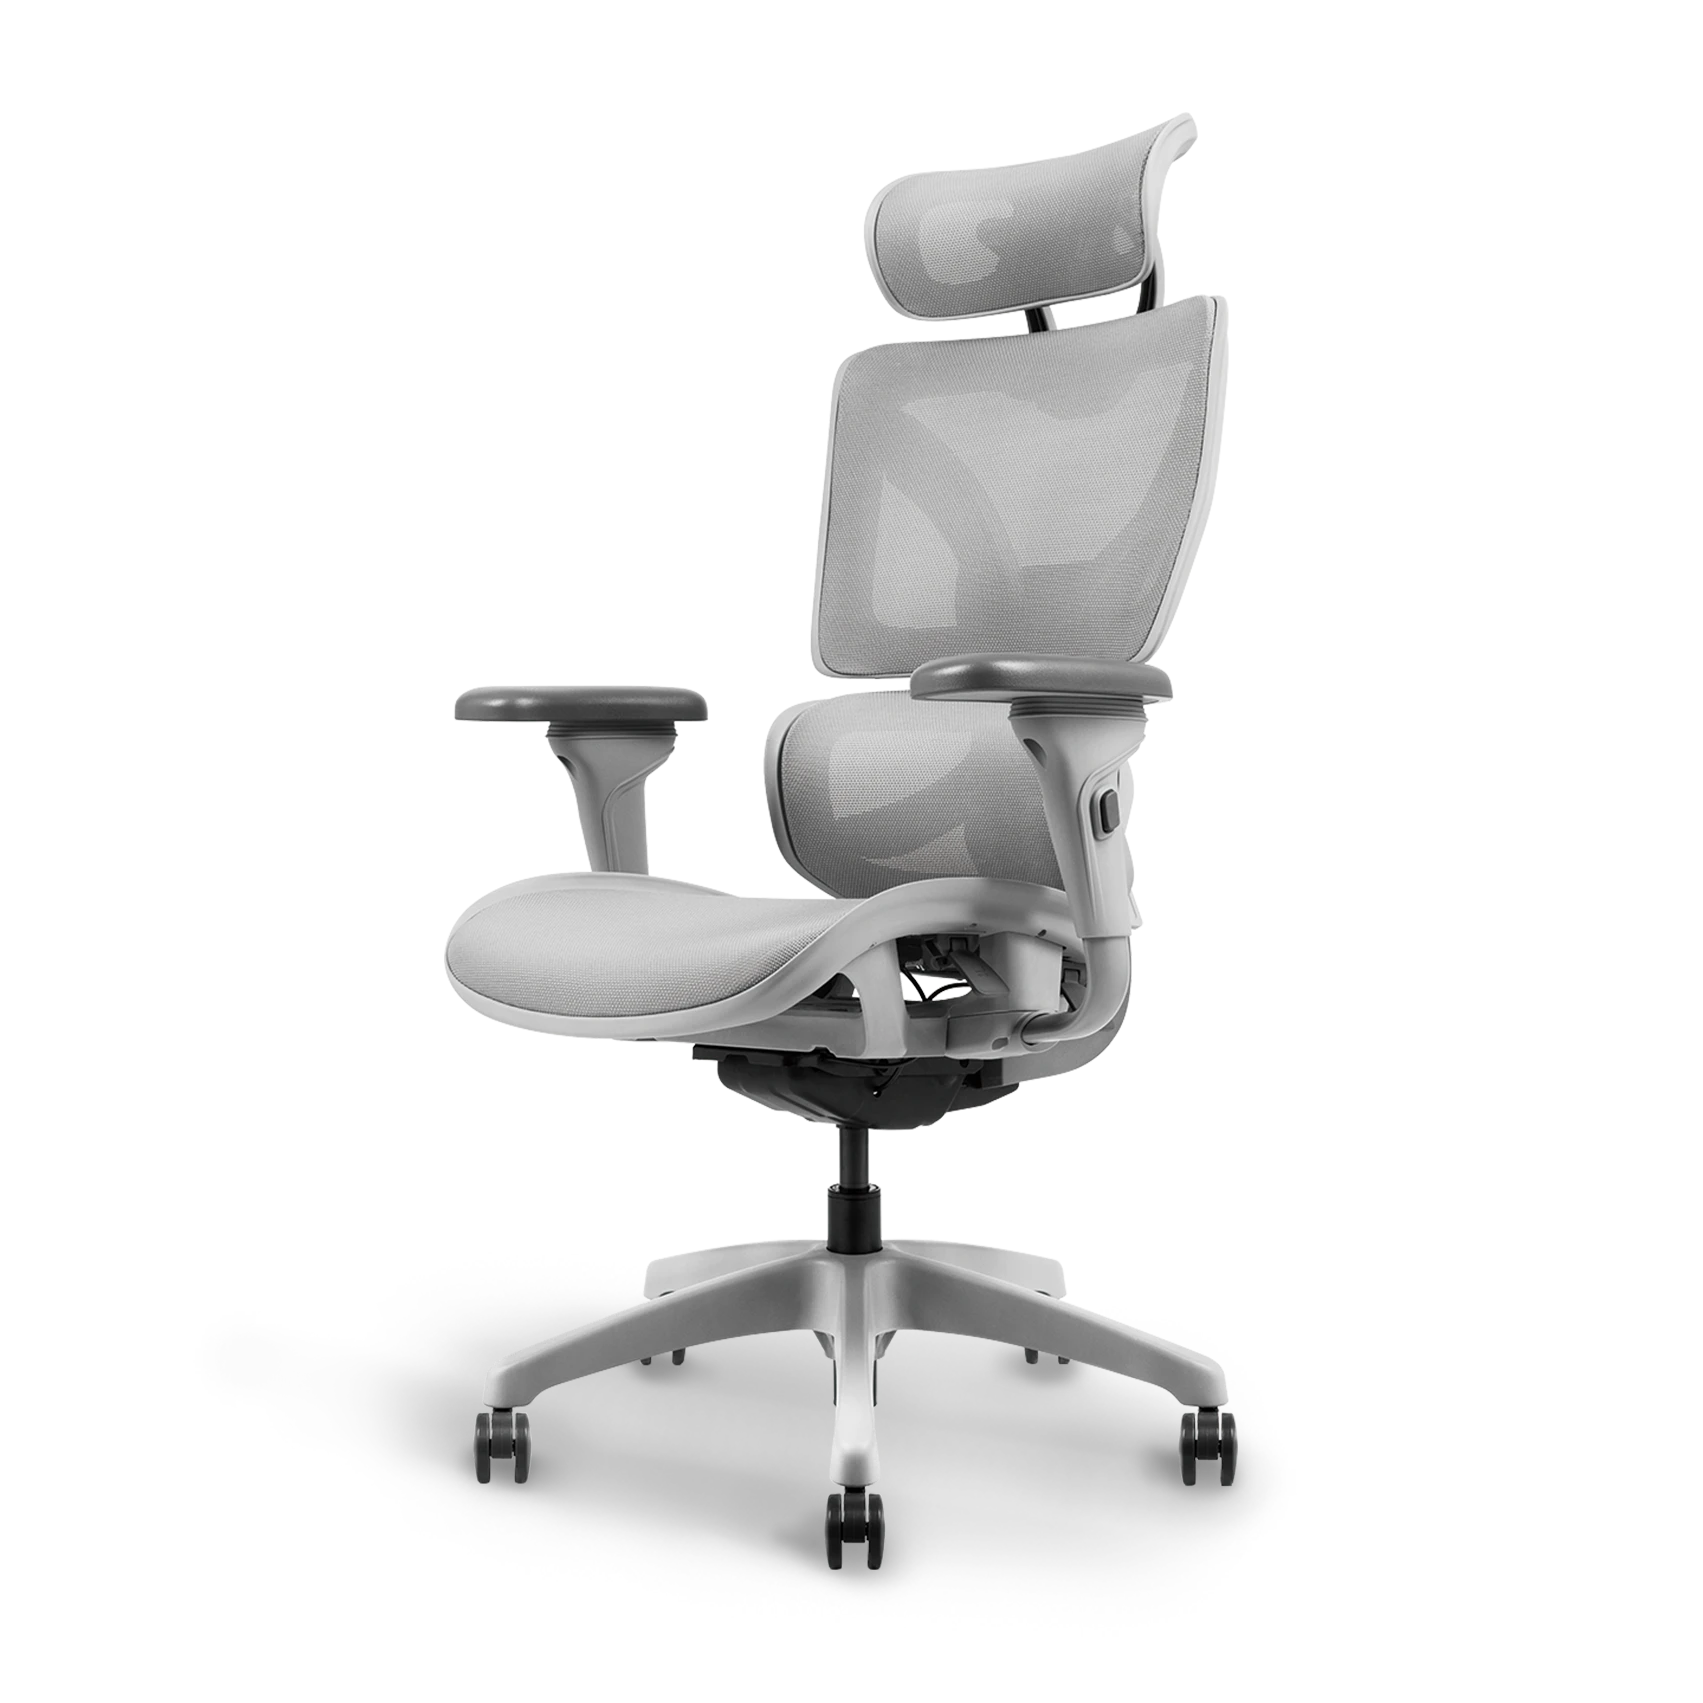 Ergonomic office chair with adjustable lumbar support and armrests by Flujo, designed for comfort and posture alignment.